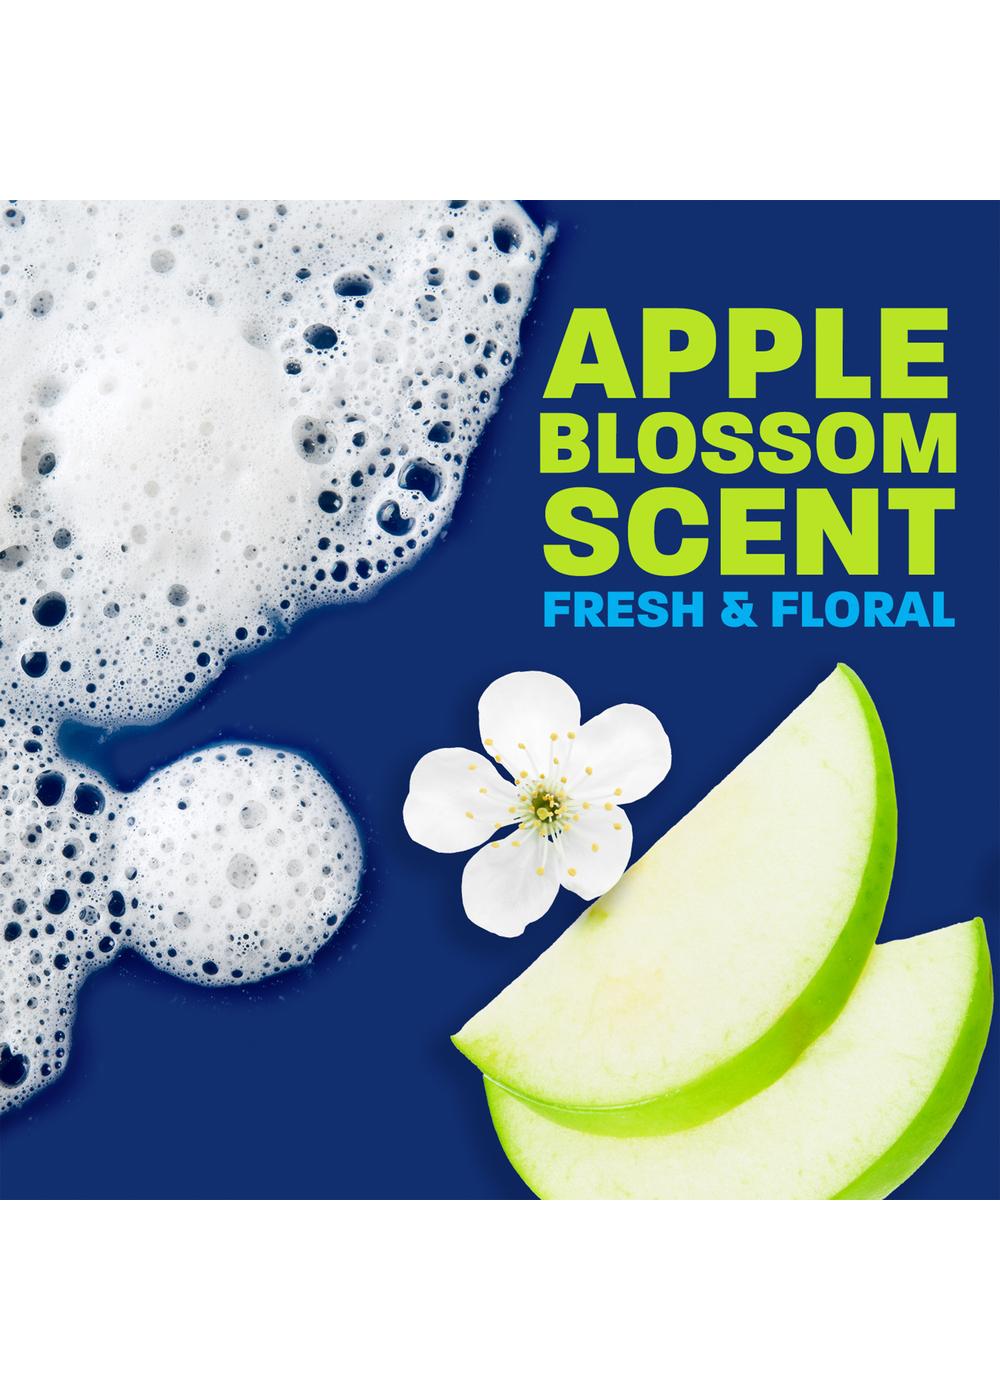 Dawn Ultra Antibacterial Hand Soap - Apple Blossom; image 6 of 6